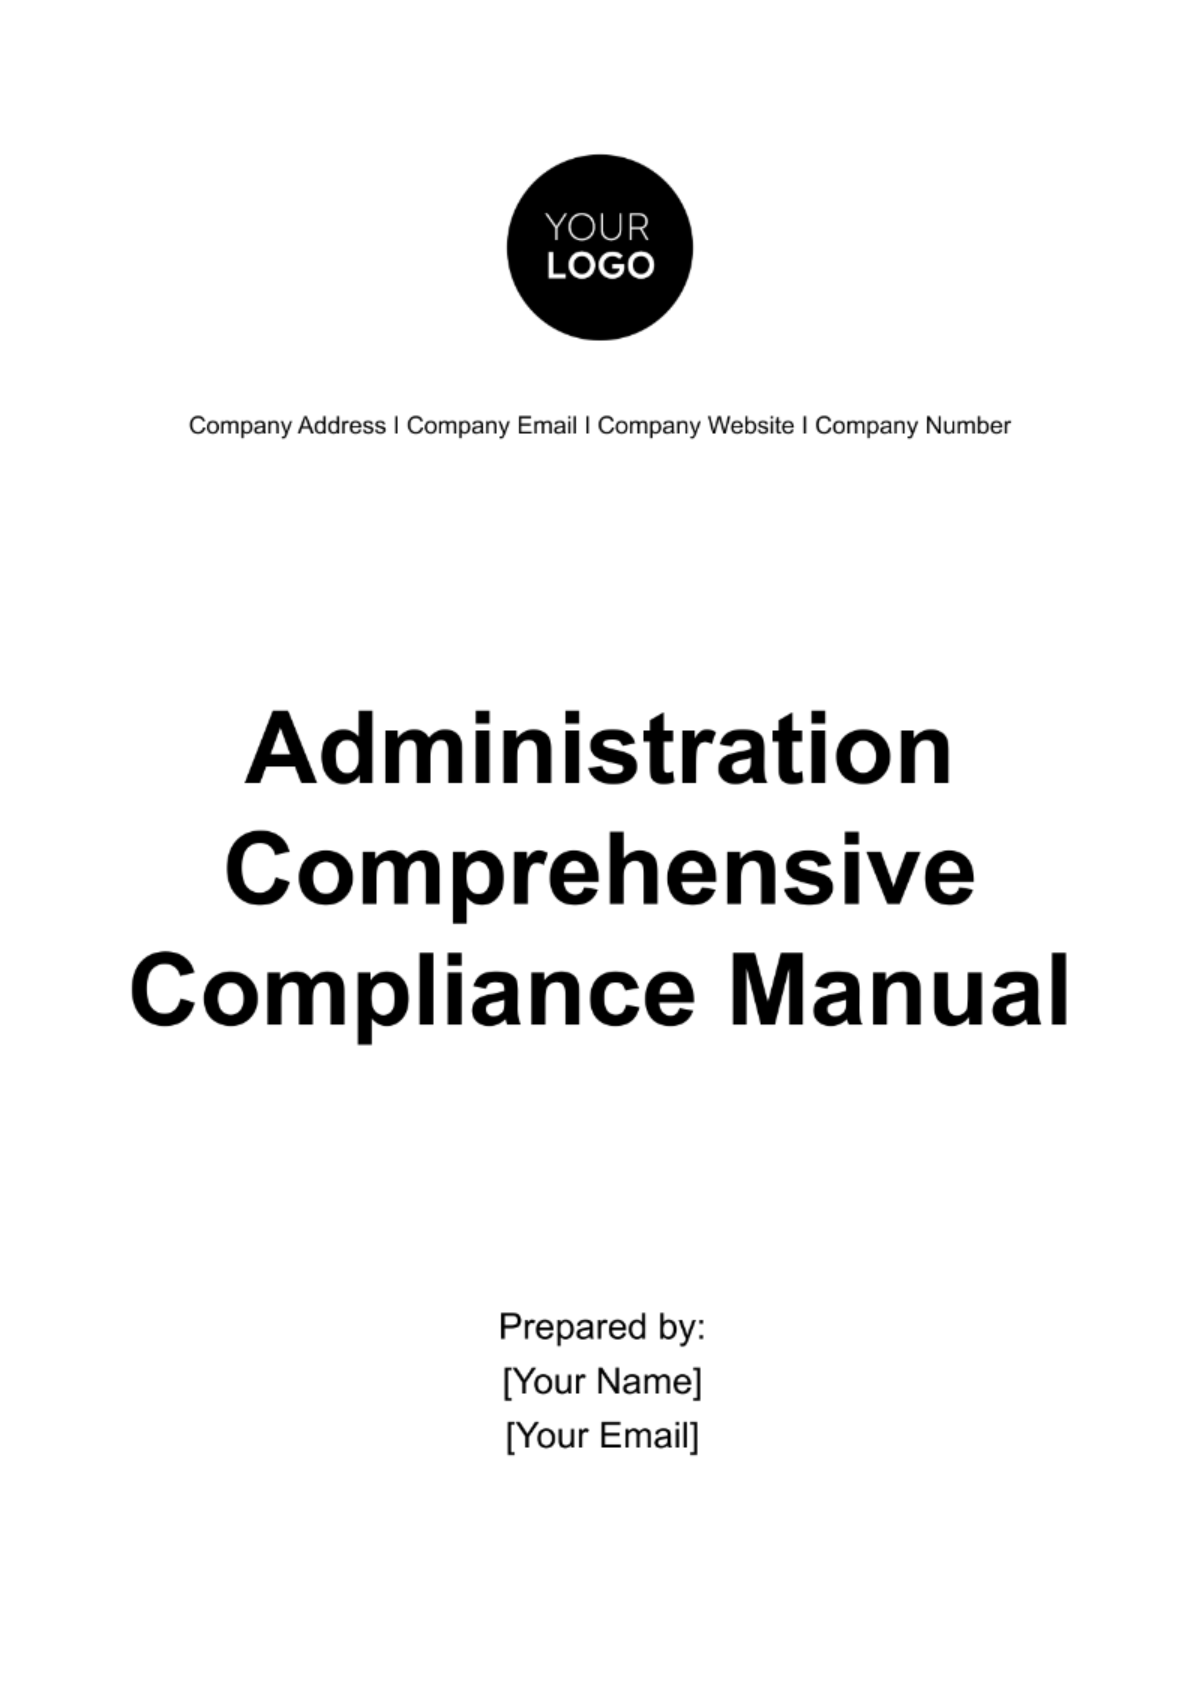 Administration Comprehensive Compliance Manual Template